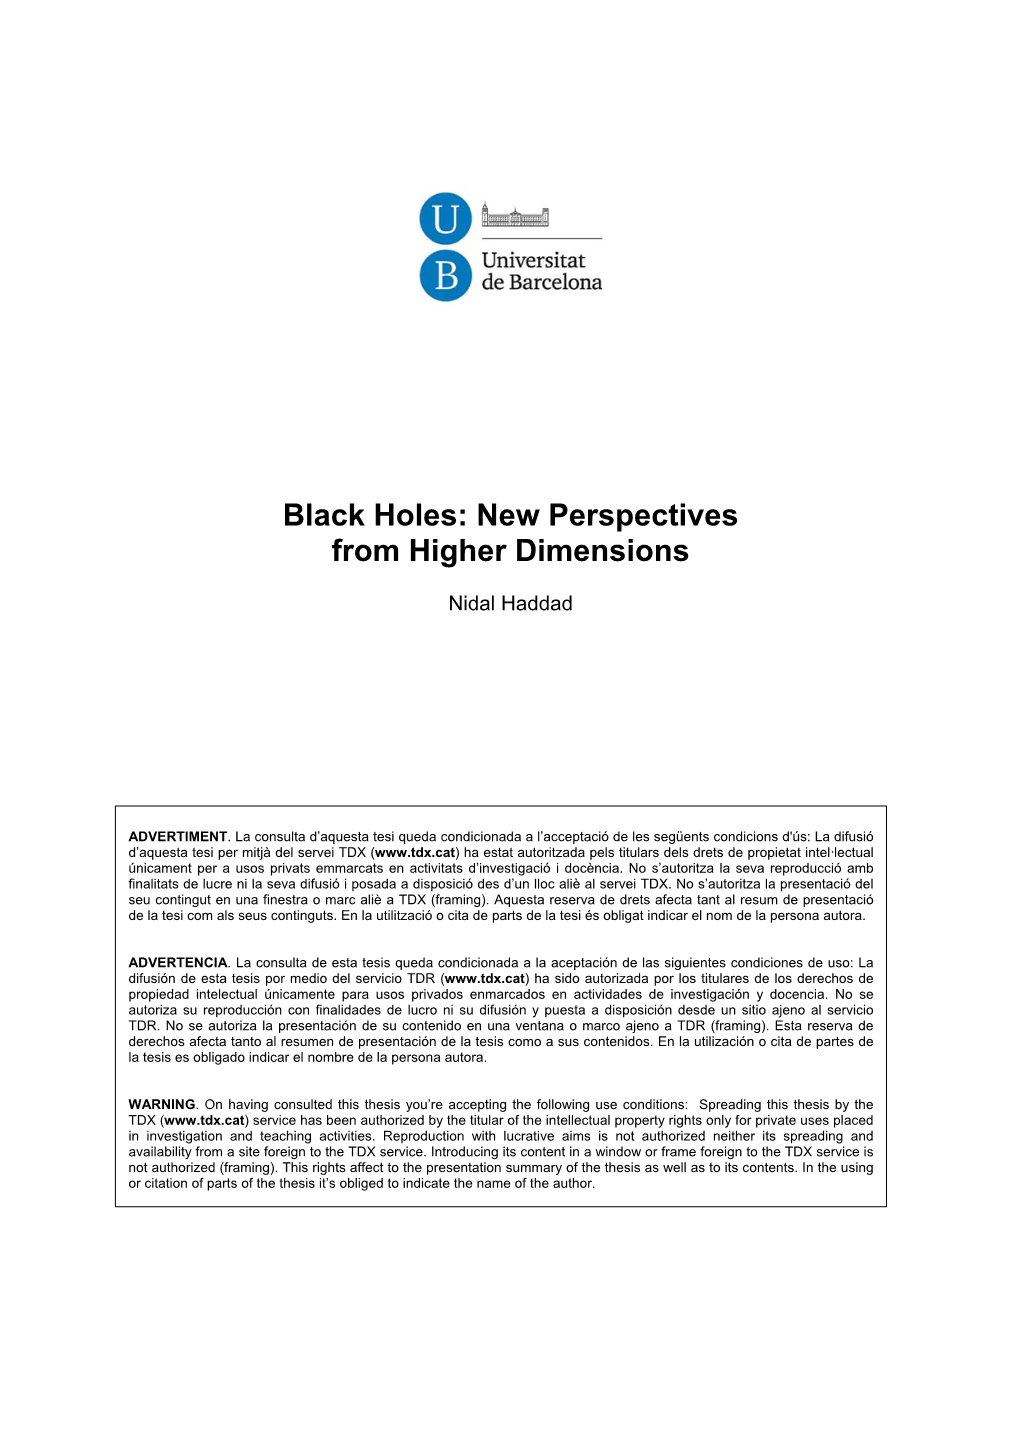 Black Holes: New Perspectives from Higher Dimensions